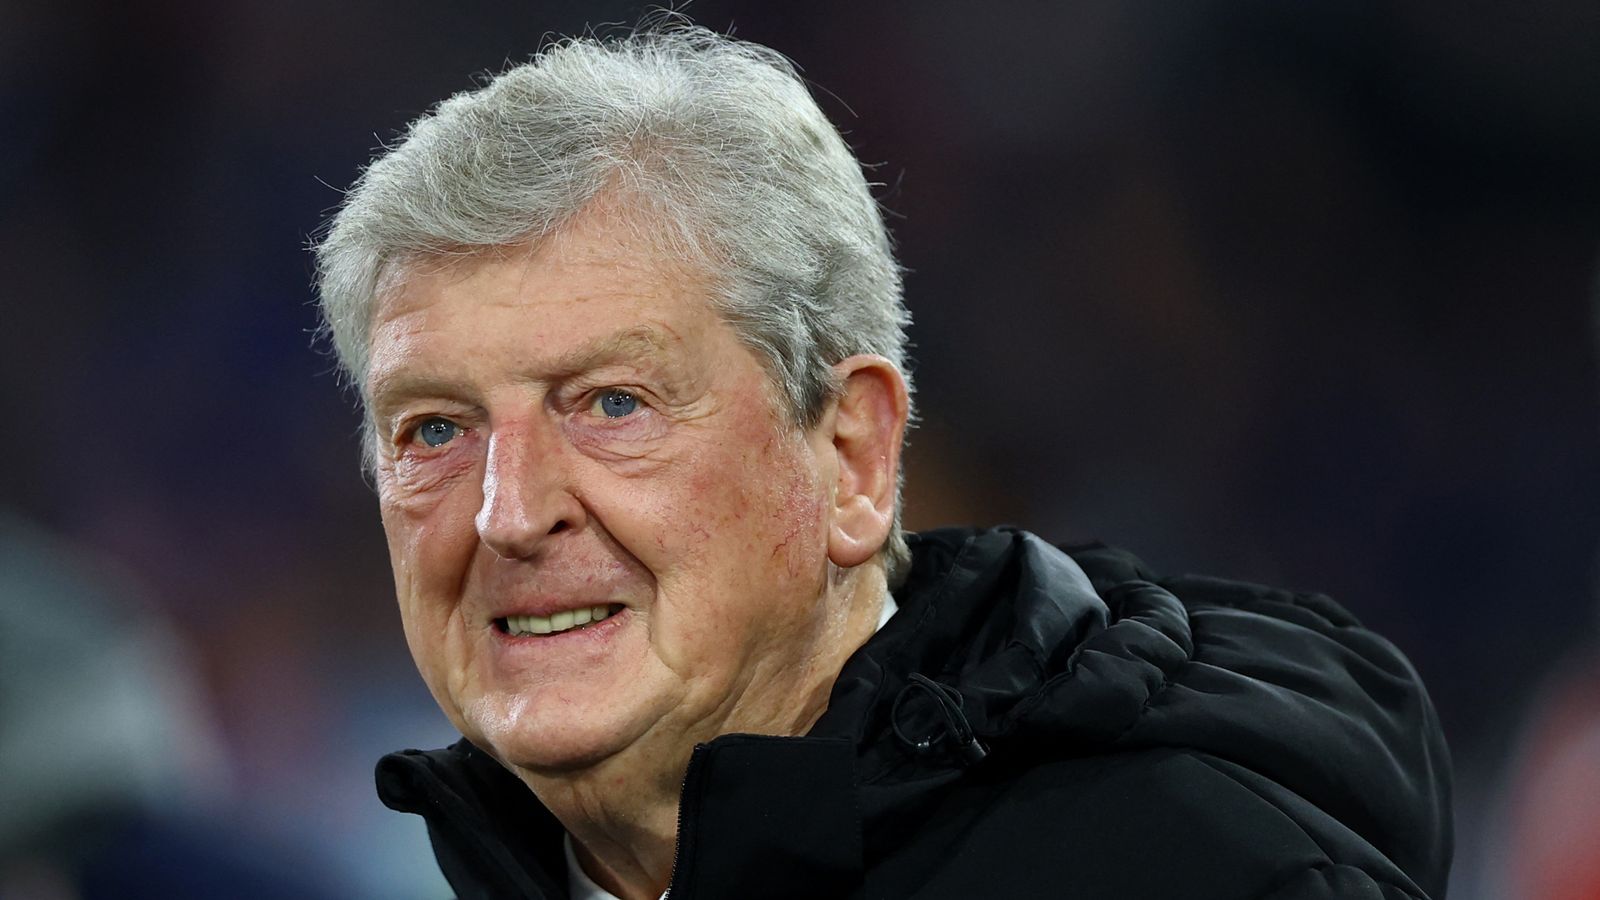 Roy Hodgson in hospital, amid rumours he may be sacked by Crystal Palace